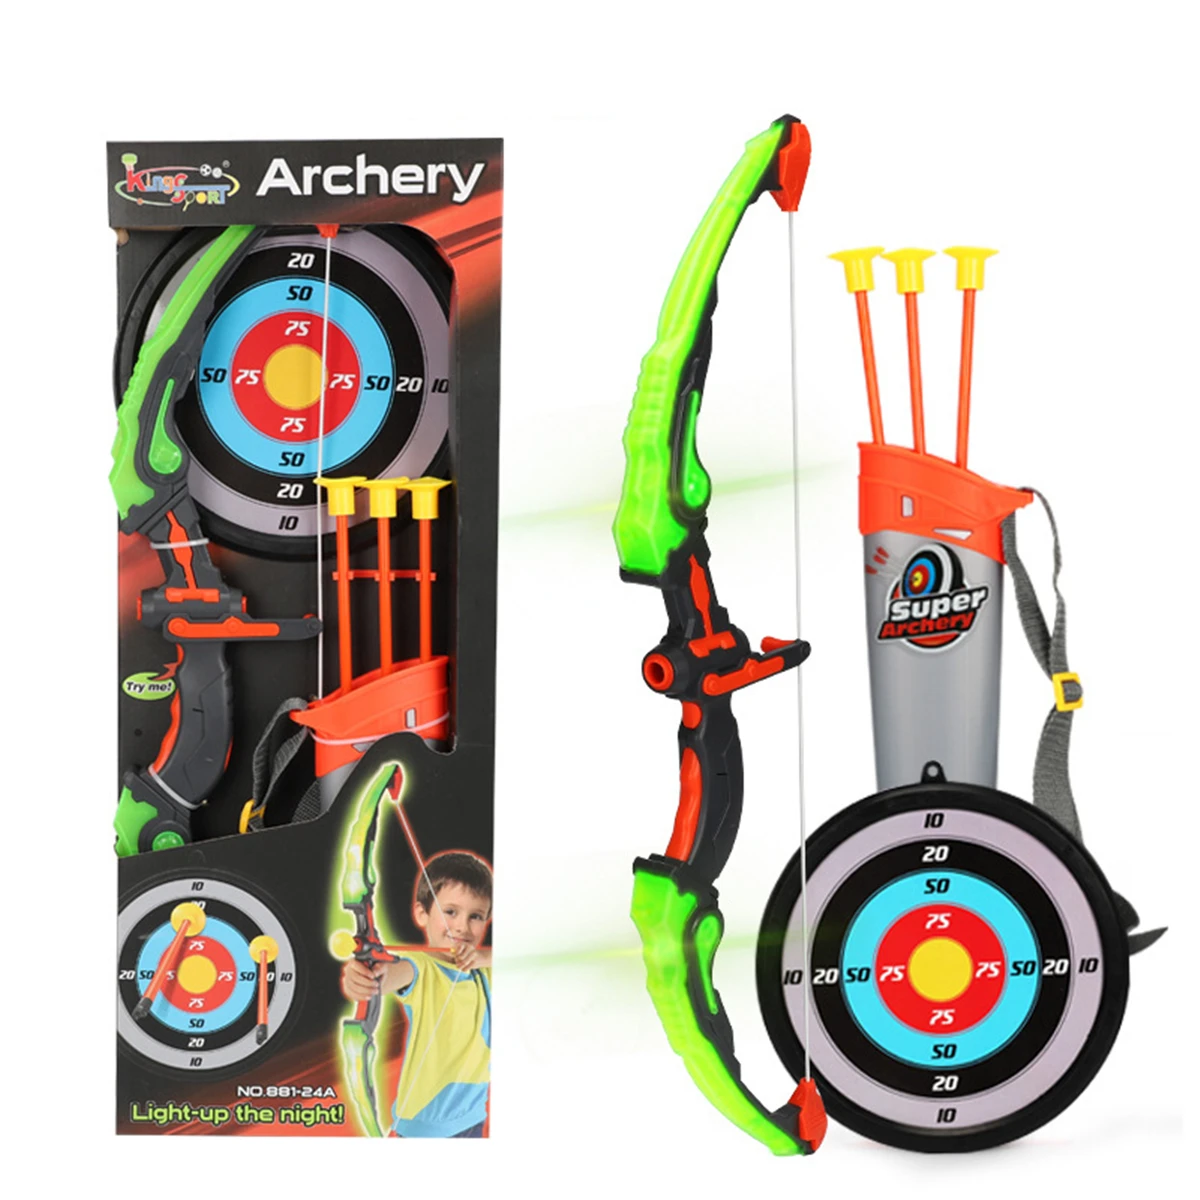 New Stats Archery Set with Lights Ages 6-12 Bow & Arrow Light up 